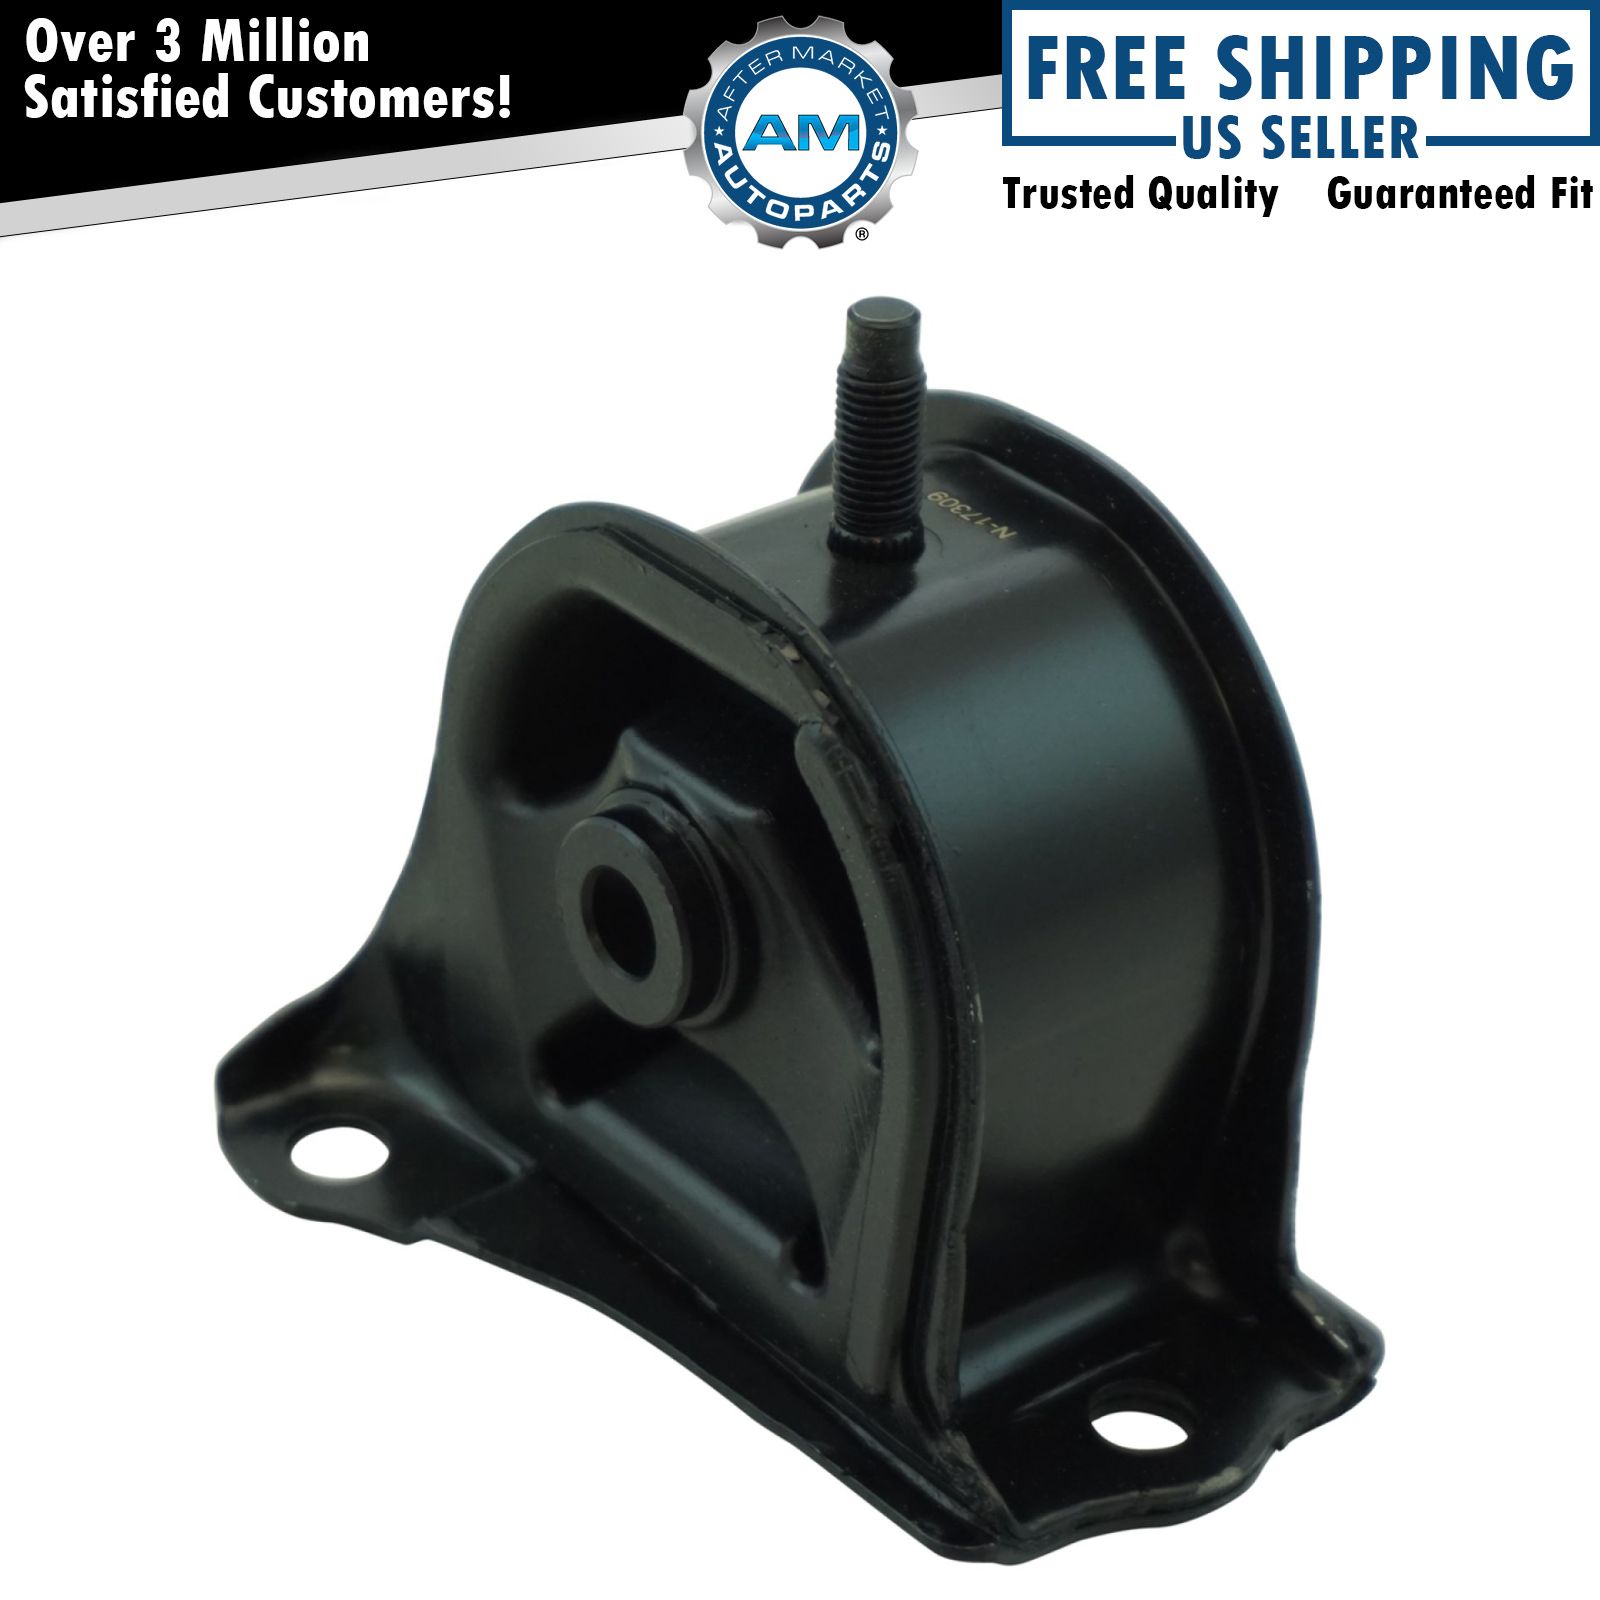 Standard Manual Transmission 2.2L Rear Engine Motor Mount for Accord Prelude